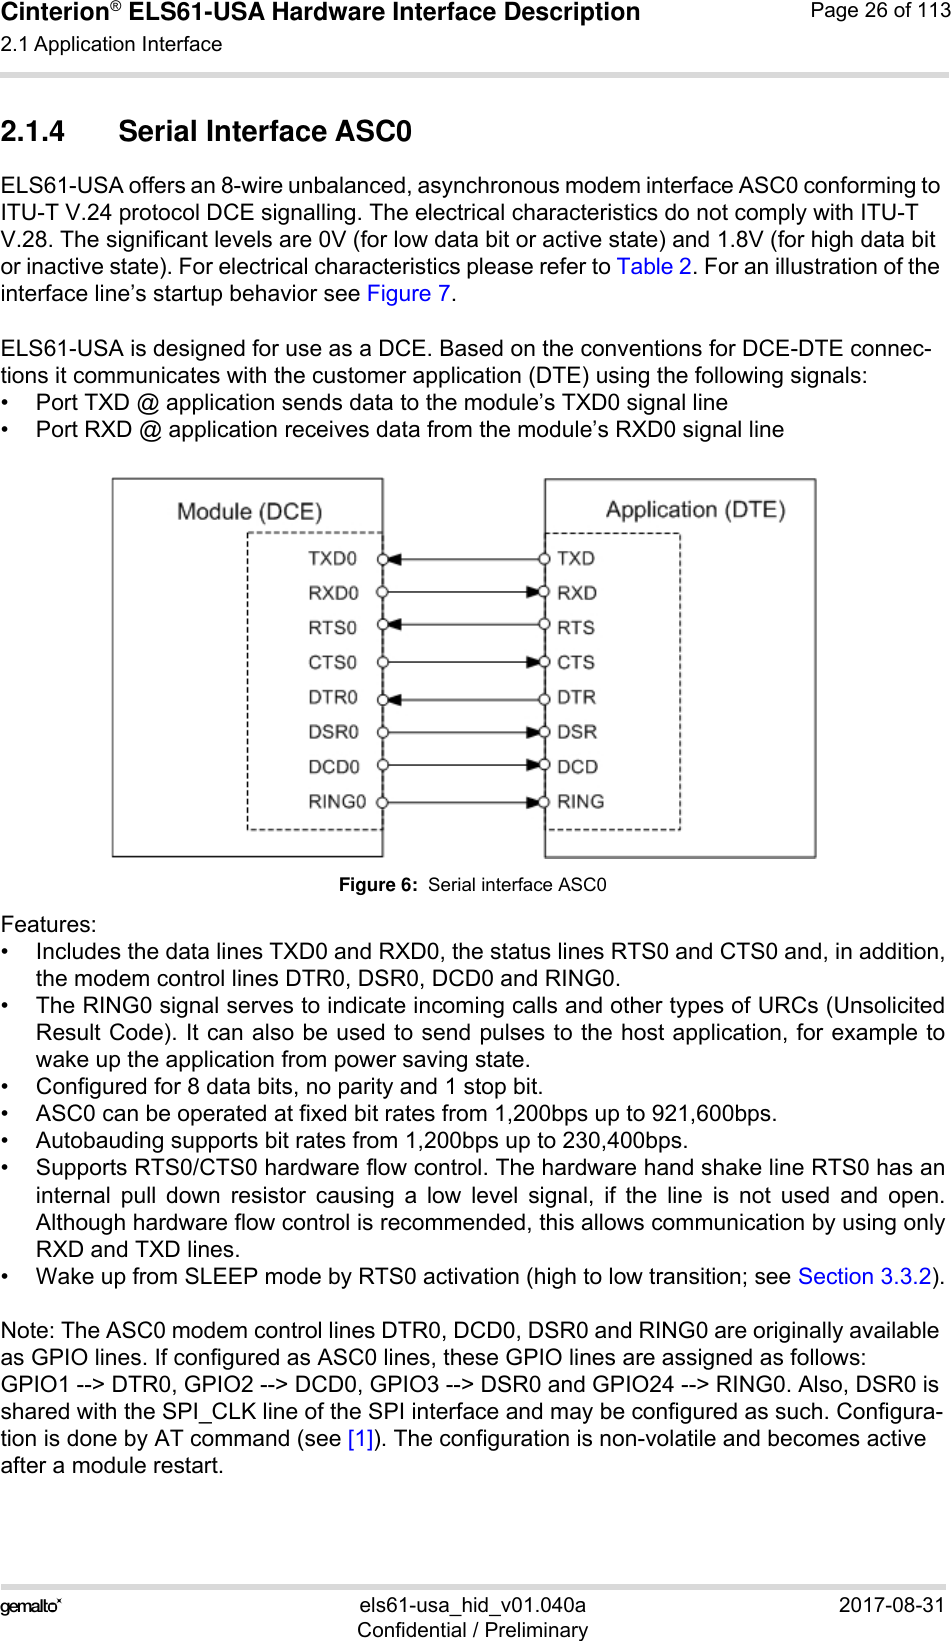 Cinterion® ELS61-USA Hardware Interface Description2.1 Application Interface59els61-usa_hid_v01.040a 2017-08-31Confidential / PreliminaryPage 26 of 1132.1.4 Serial Interface ASC0ELS61-USA offers an 8-wire unbalanced, asynchronous modem interface ASC0 conforming to ITU-T V.24 protocol DCE signalling. The electrical characteristics do not comply with ITU-T V.28. The significant levels are 0V (for low data bit or active state) and 1.8V (for high data bit or inactive state). For electrical characteristics please refer to Table 2. For an illustration of the interface line’s startup behavior see Figure 7.ELS61-USA is designed for use as a DCE. Based on the conventions for DCE-DTE connec-tions it communicates with the customer application (DTE) using the following signals:• Port TXD @ application sends data to the module’s TXD0 signal line• Port RXD @ application receives data from the module’s RXD0 signal lineFigure 6:  Serial interface ASC0Features:• Includes the data lines TXD0 and RXD0, the status lines RTS0 and CTS0 and, in addition,the modem control lines DTR0, DSR0, DCD0 and RING0.• The RING0 signal serves to indicate incoming calls and other types of URCs (UnsolicitedResult Code). It can also be used to send pulses to the host application, for example towake up the application from power saving state. • Configured for 8 data bits, no parity and 1 stop bit. • ASC0 can be operated at fixed bit rates from 1,200bps up to 921,600bps.• Autobauding supports bit rates from 1,200bps up to 230,400bps.• Supports RTS0/CTS0 hardware flow control. The hardware hand shake line RTS0 has aninternal pull down resistor causing a low level signal, if the line is not used and open.Although hardware flow control is recommended, this allows communication by using onlyRXD and TXD lines.• Wake up from SLEEP mode by RTS0 activation (high to low transition; see Section 3.3.2).Note: The ASC0 modem control lines DTR0, DCD0, DSR0 and RING0 are originally available as GPIO lines. If configured as ASC0 lines, these GPIO lines are assigned as follows: GPIO1 --&gt; DTR0, GPIO2 --&gt; DCD0, GPIO3 --&gt; DSR0 and GPIO24 --&gt; RING0. Also, DSR0 is shared with the SPI_CLK line of the SPI interface and may be configured as such. Configura-tion is done by AT command (see [1]). The configuration is non-volatile and becomes active after a module restart.